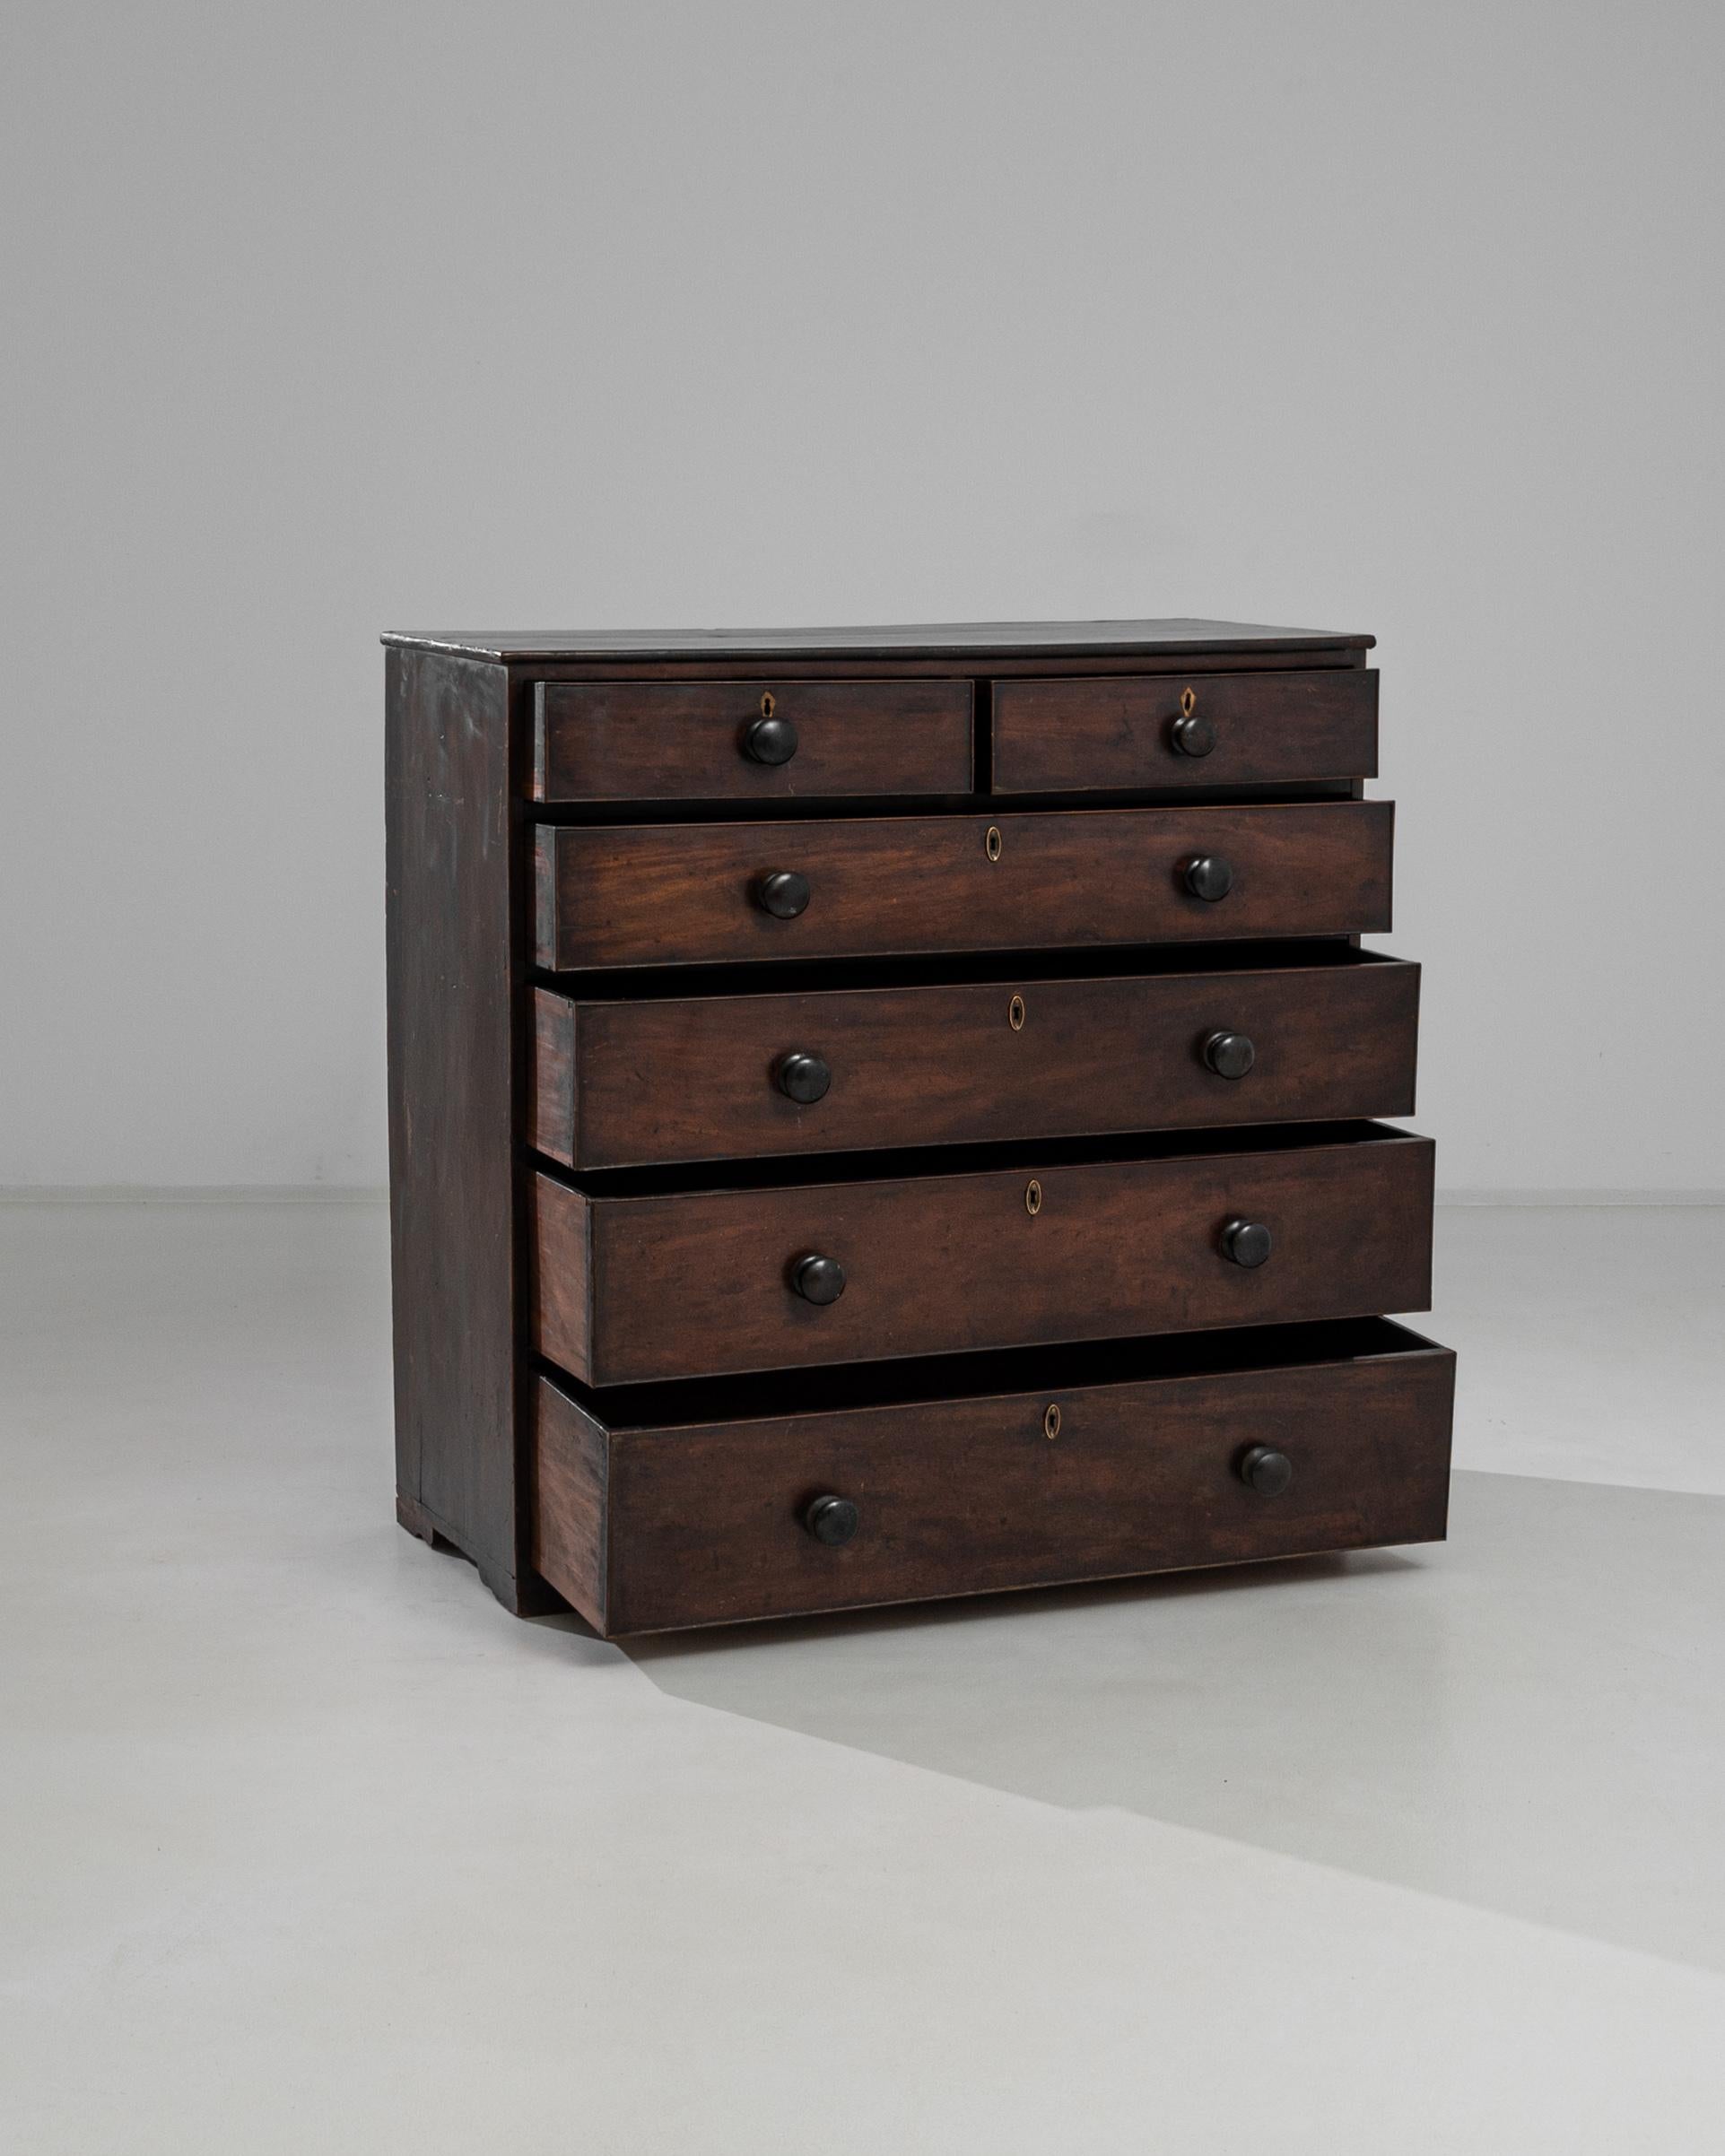 This 1860s British Wooden Chest of Drawers is a rich tapestry of history and craftsmanship. With its original patina, this piece carries the whispers of the past into the modern home. The well-worn wood tells a story of enduring strength, while the